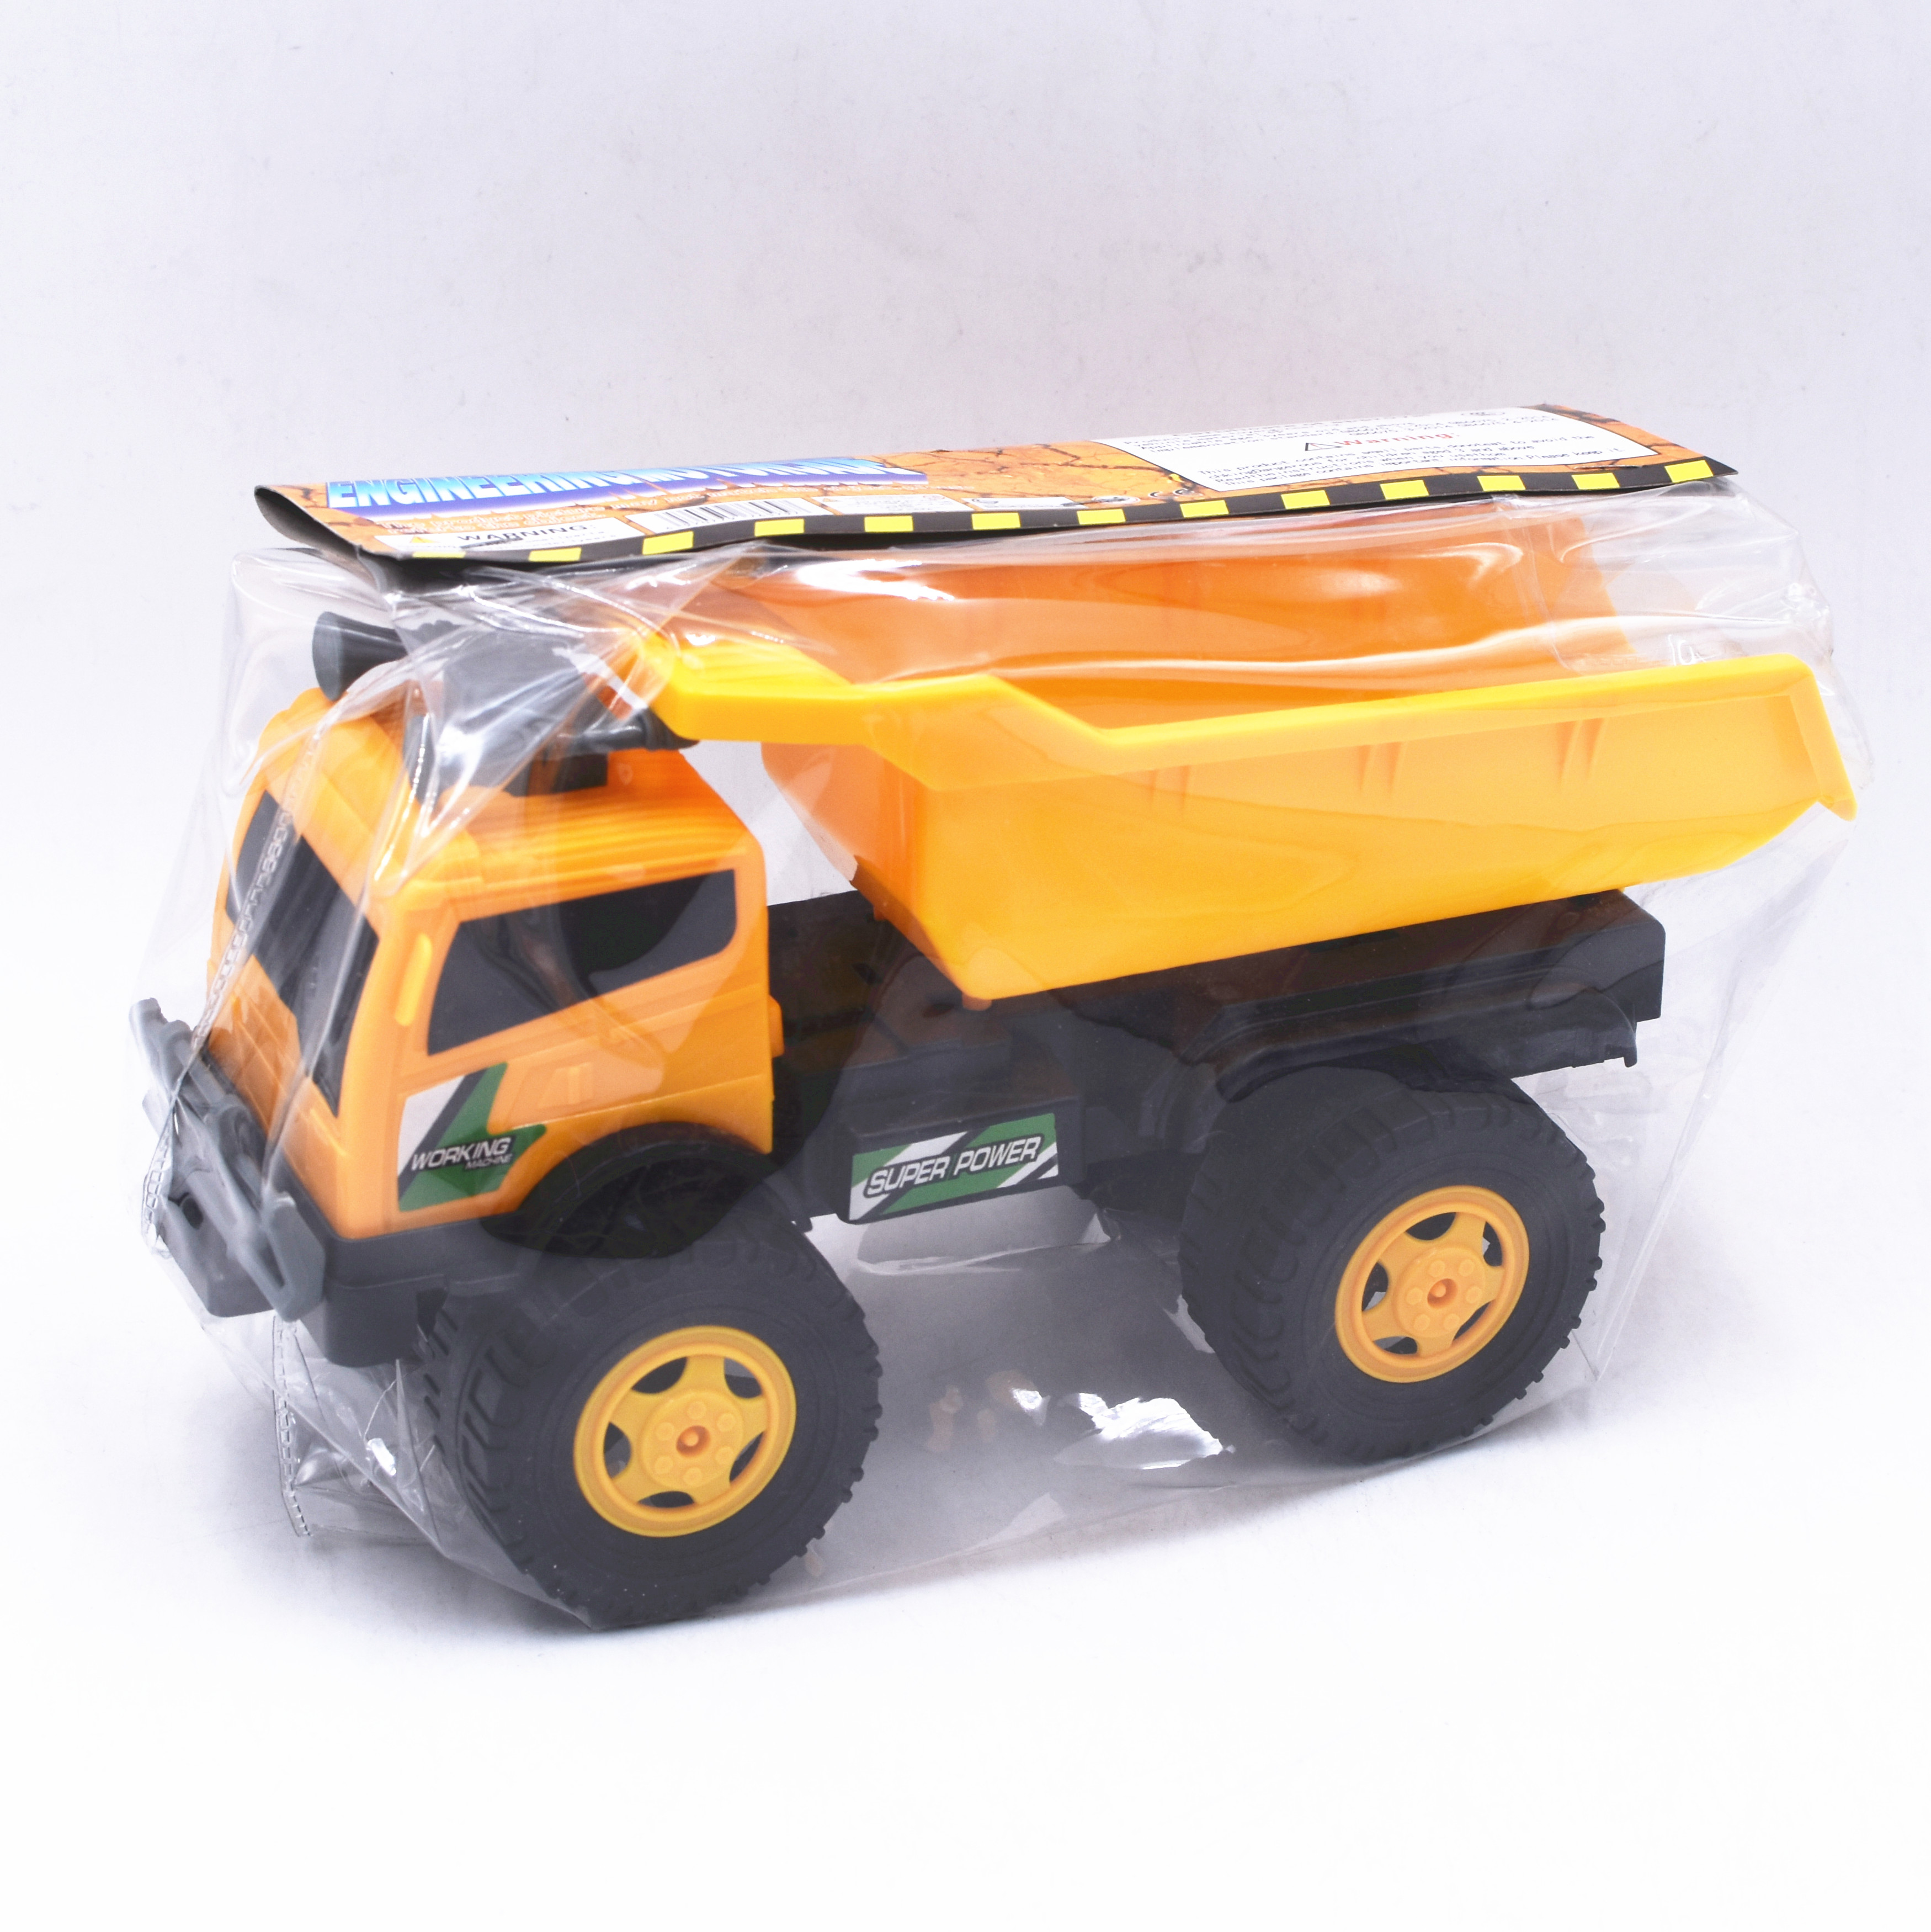 FREE WHEEL TRUCK TOY LY1770